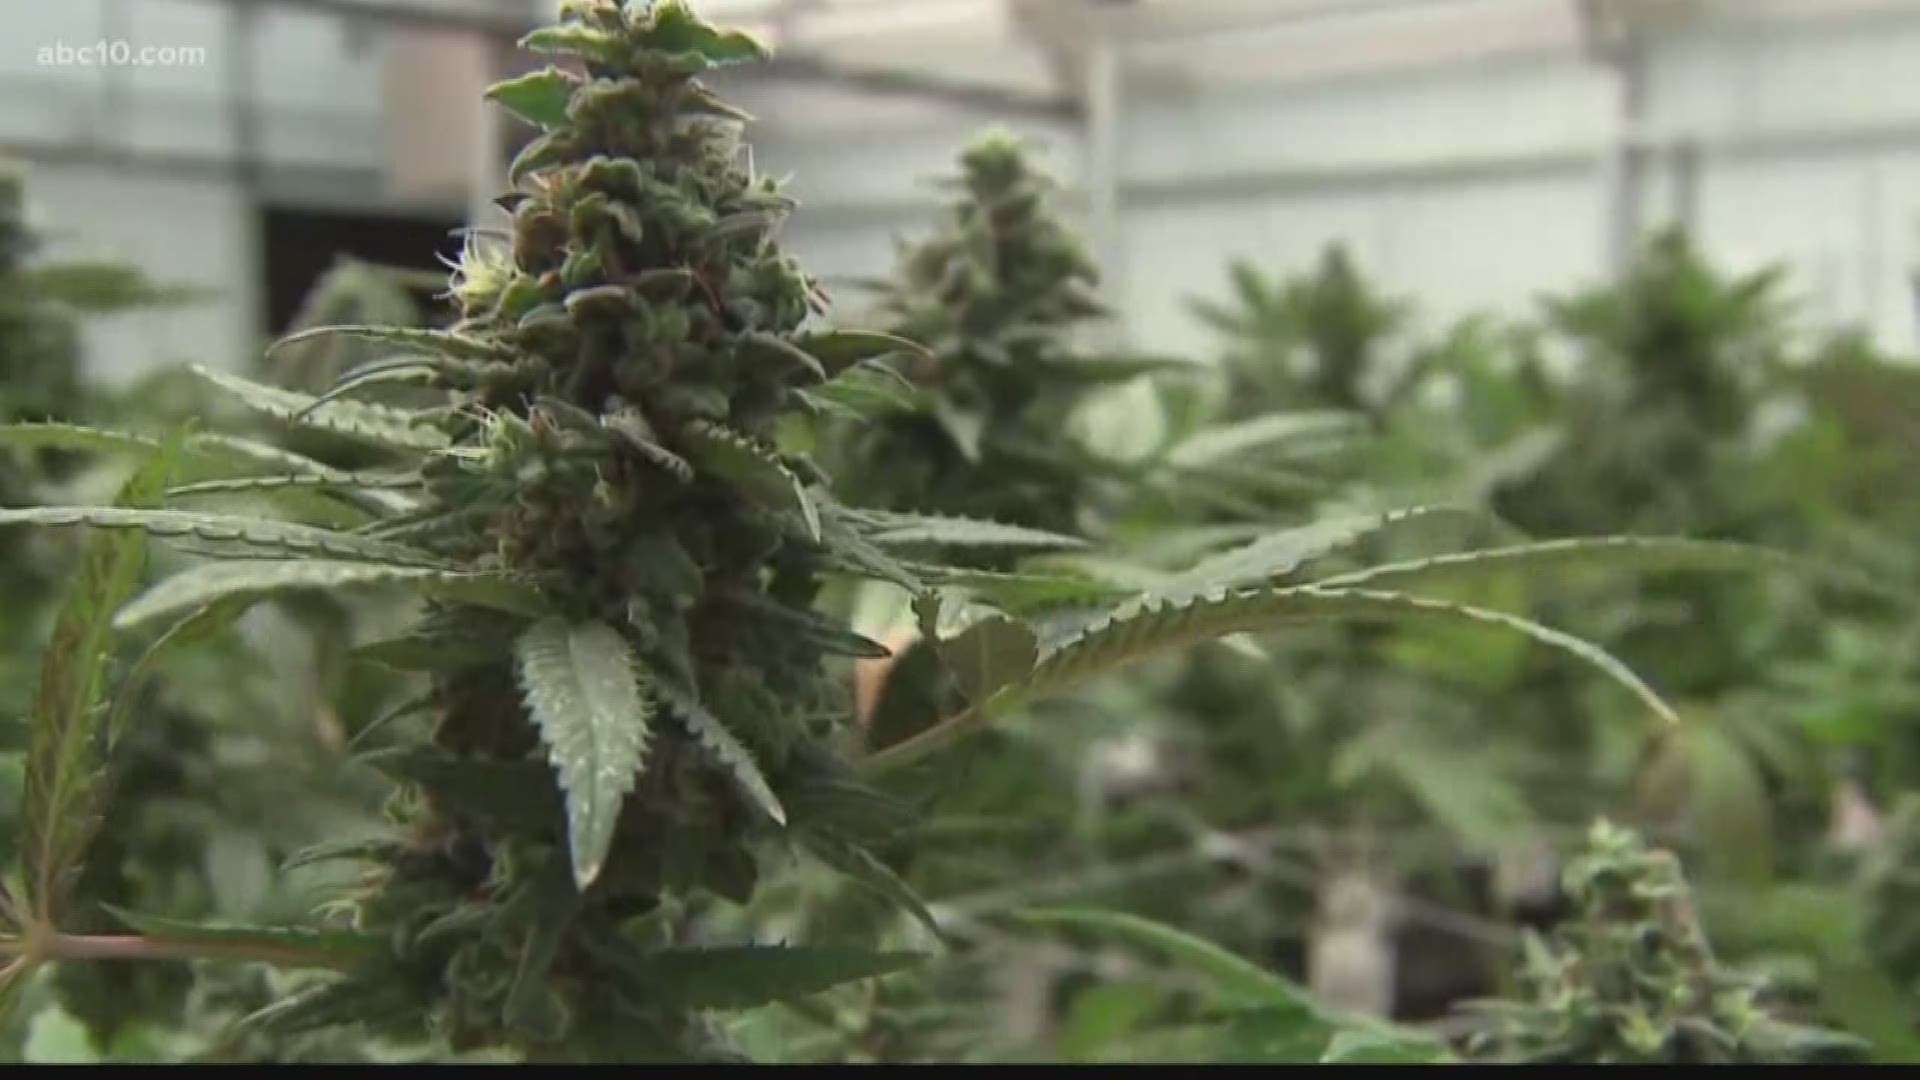 Enforcement just one part of preparation for legal sale of recreational marijuana.